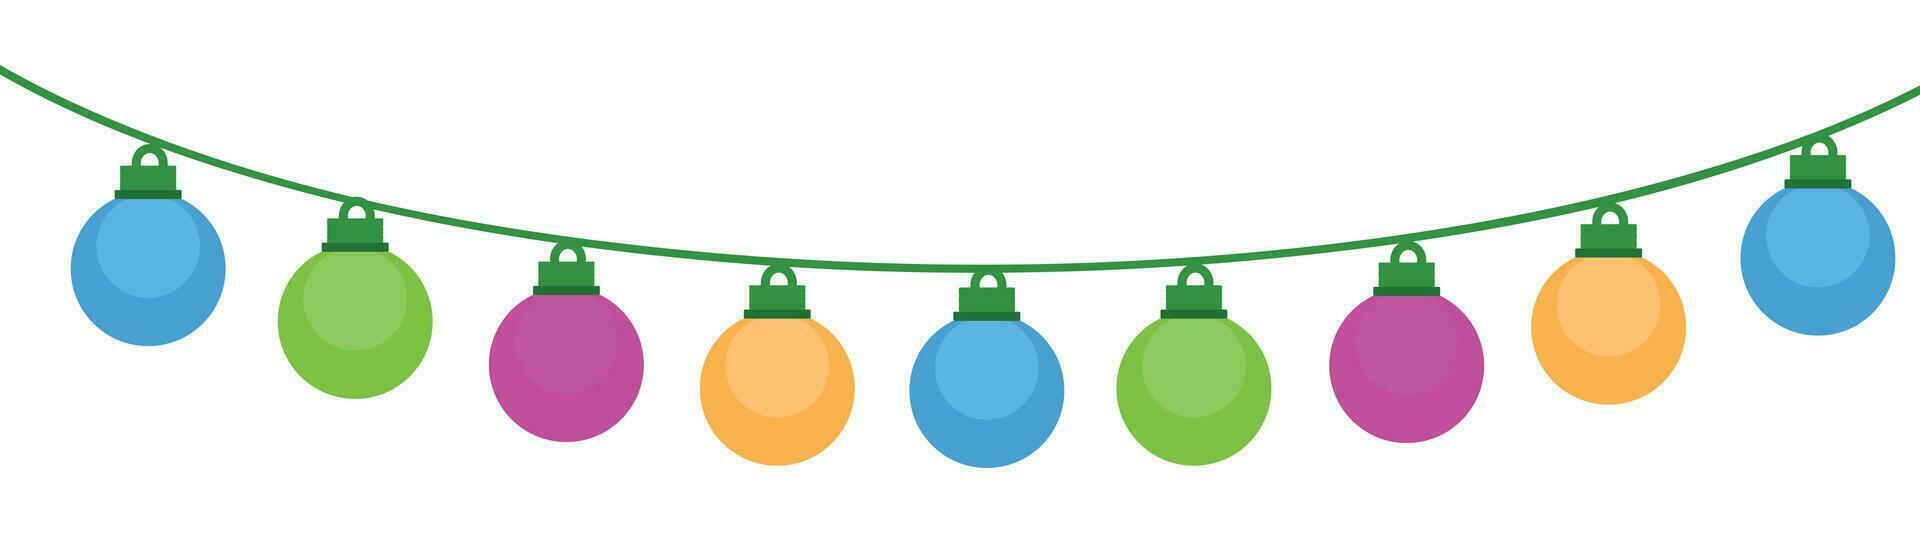 New Year and Christmas garland of multi-colored light bulbs on a white background. vector